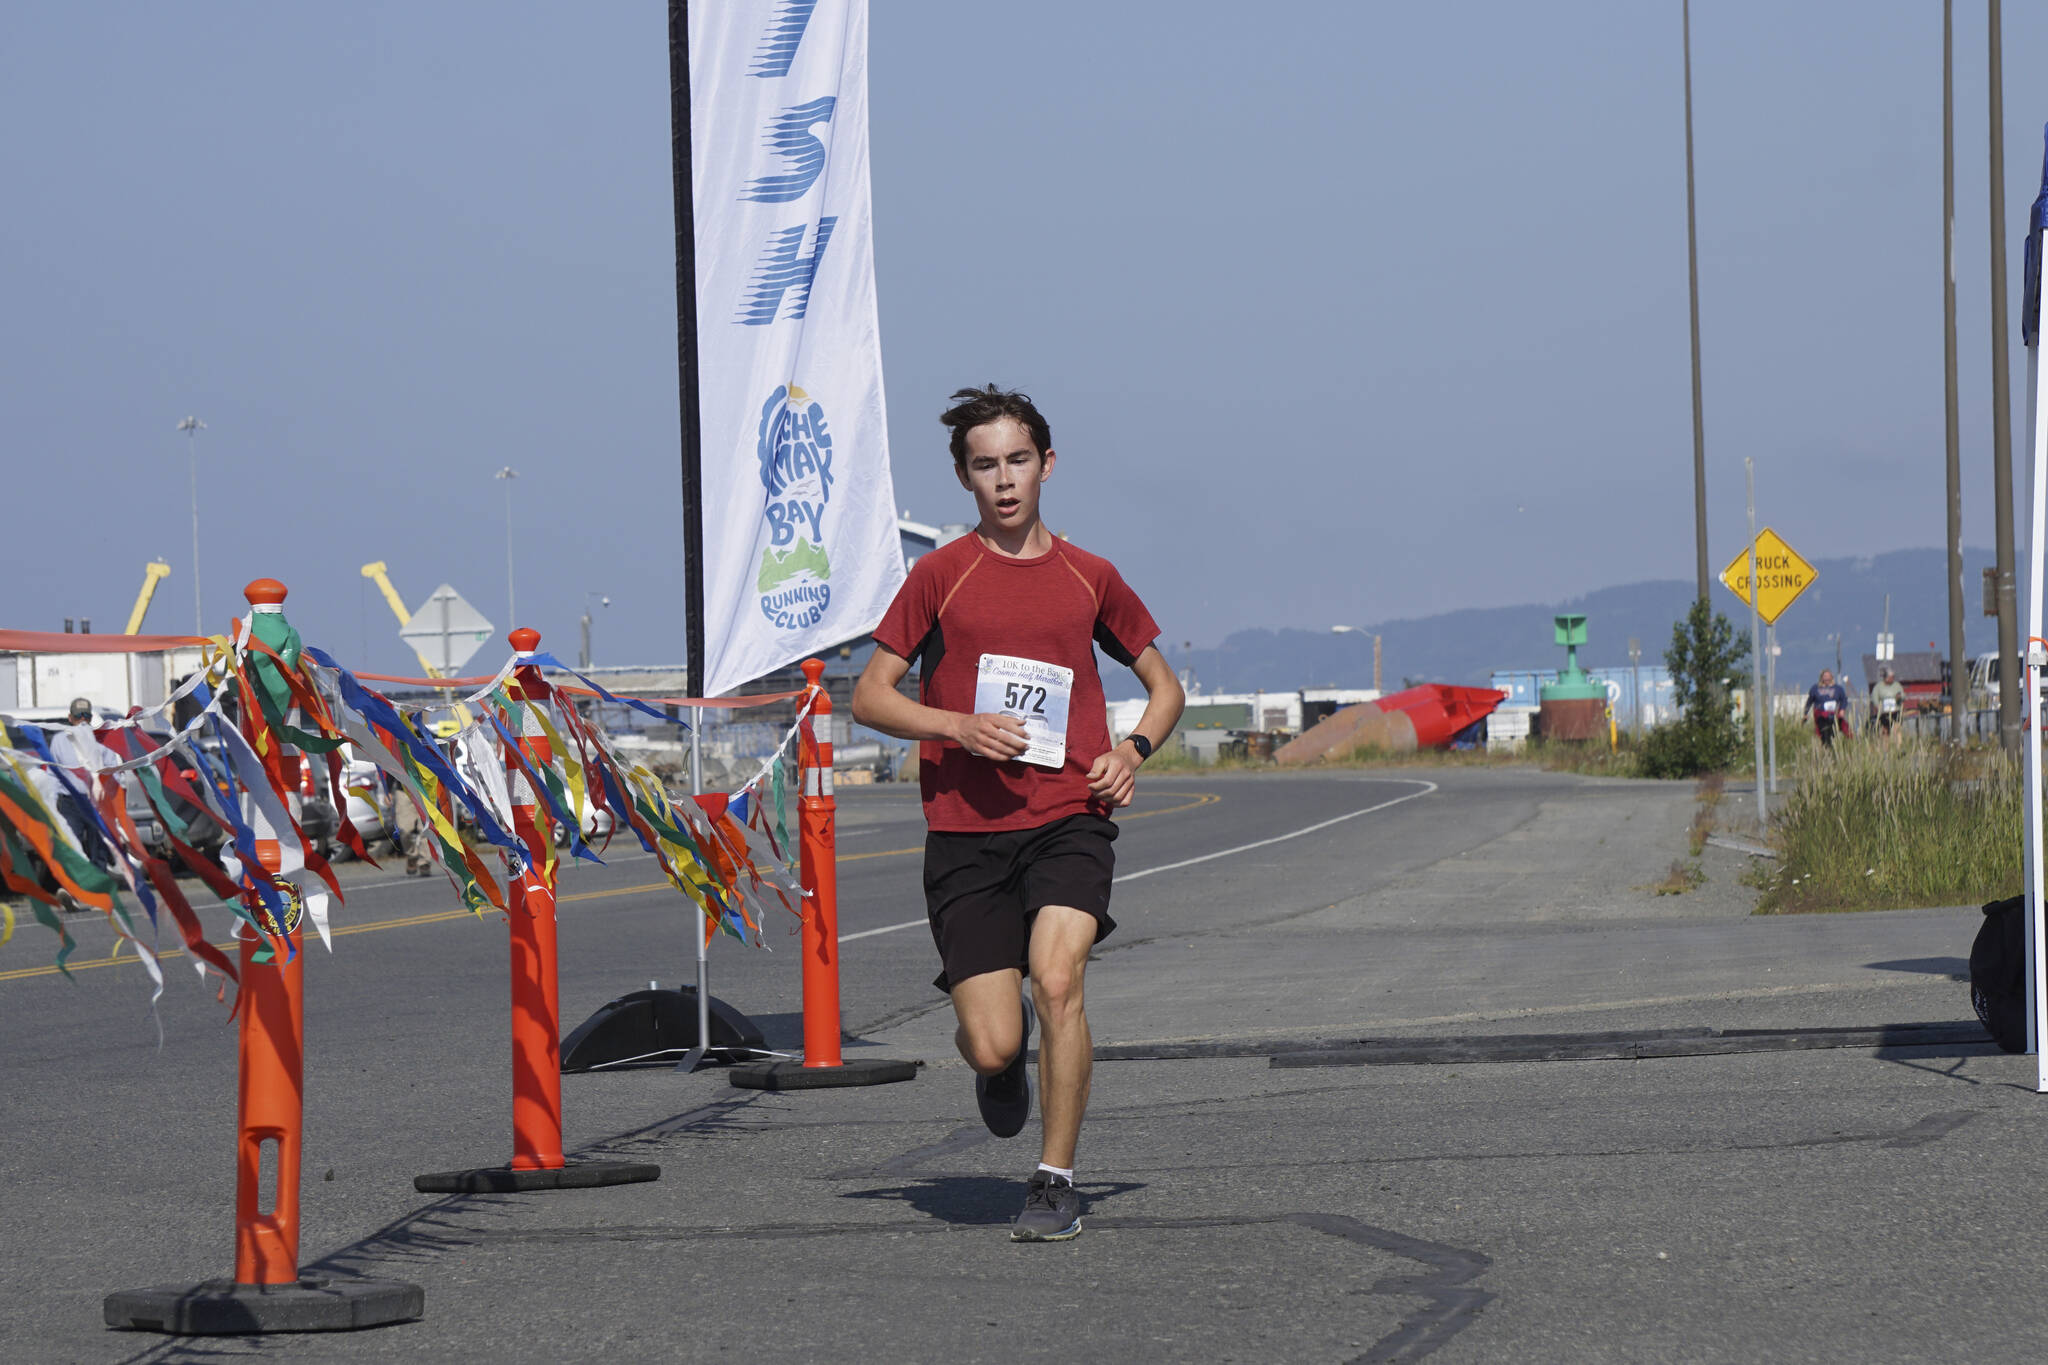 Evan Markelz, the first-place man in the 2022 Homer Spit Run 10k, crosses the finish line on Saturday, June 25, 2022, at the End of the Road Park in Homer, Alaska. (Photo by Michael Armstrong/Homer News)